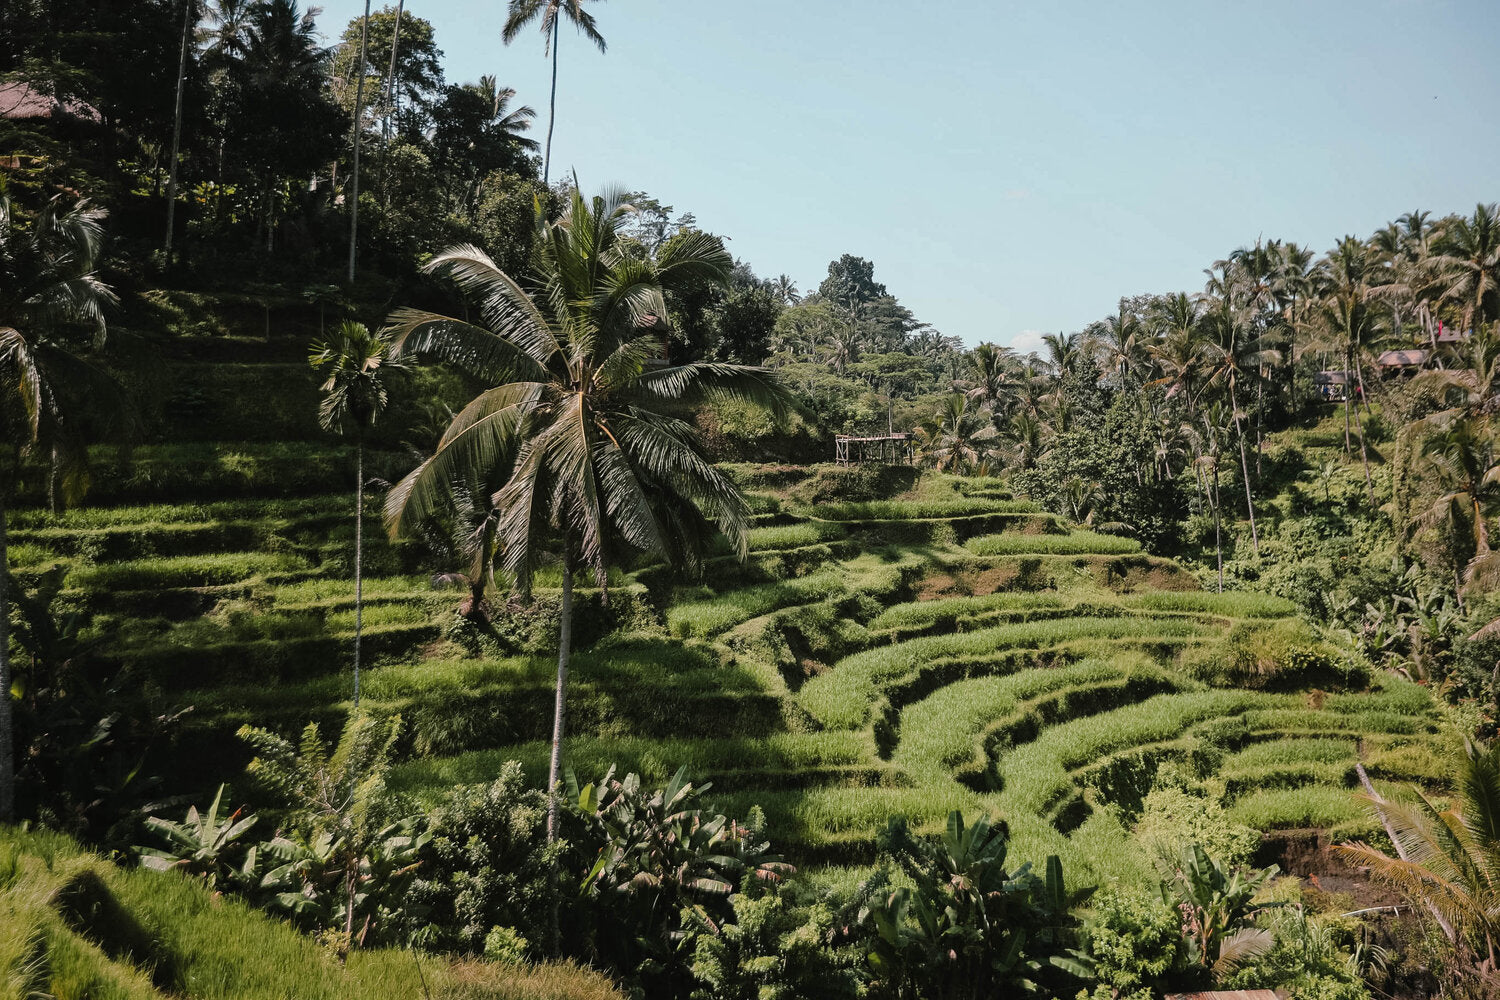 View of Tegalalang Rice Fields in Ubud, Bali